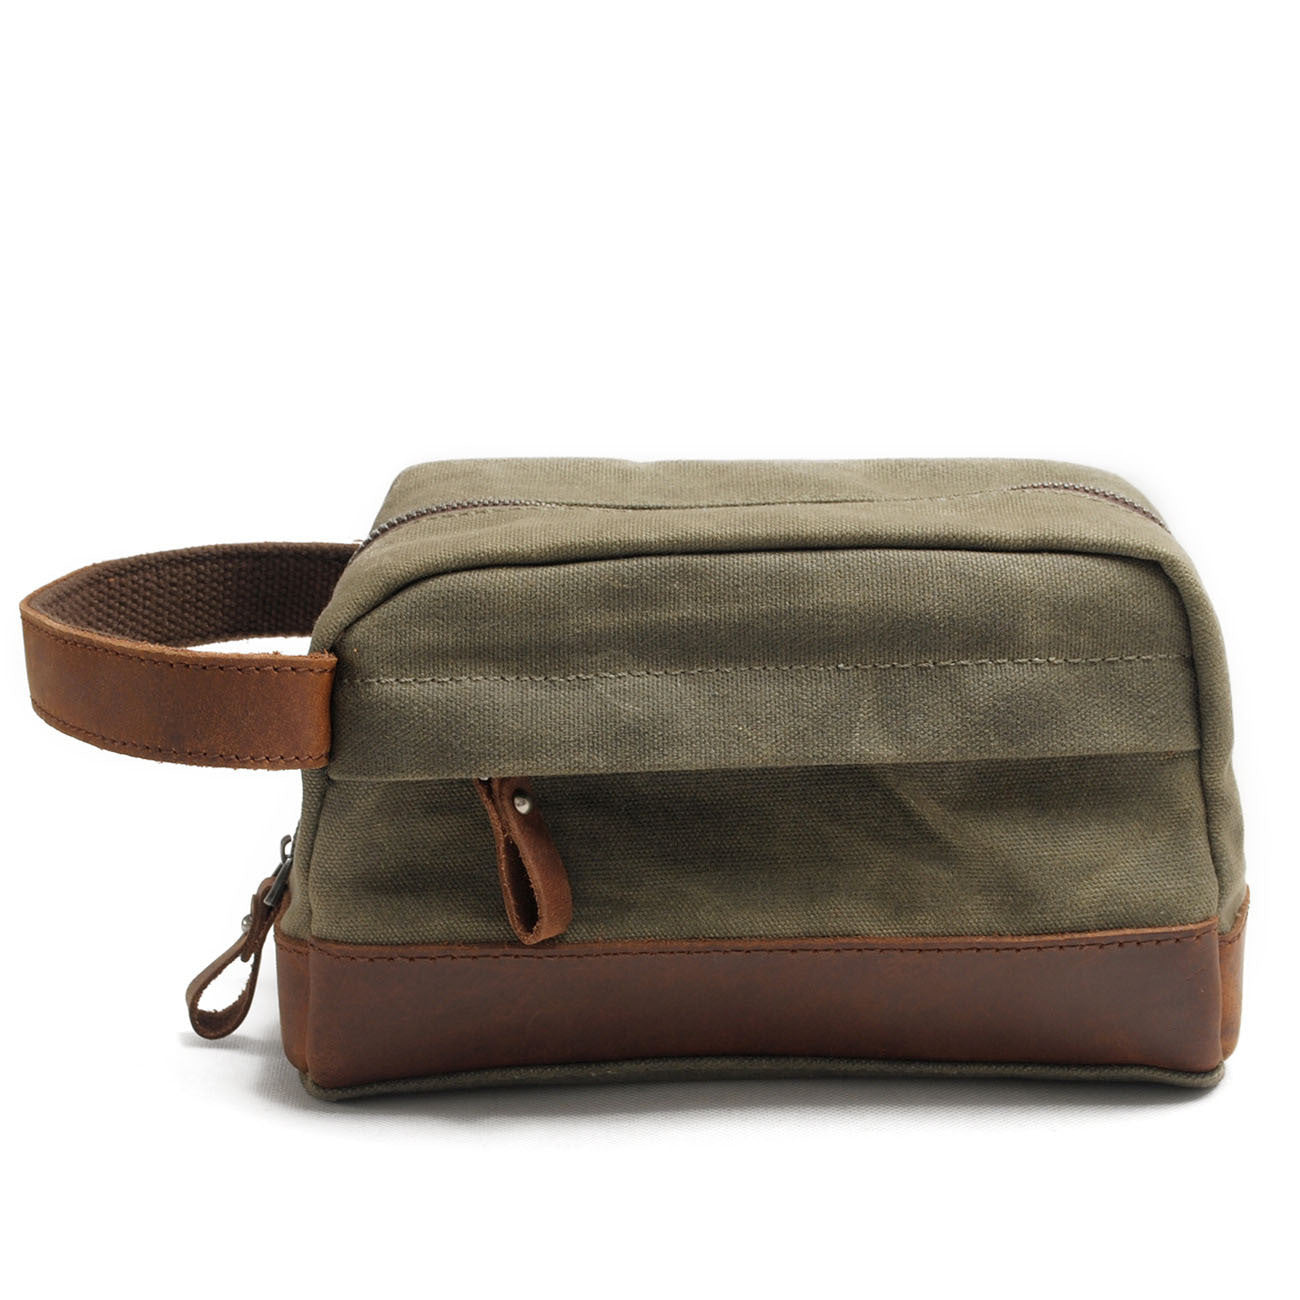 Vintage Waxed Canvas Toiletry Bag for Men 9138-Toiletry Bag-Army Green-Free Shipping Leatheretro